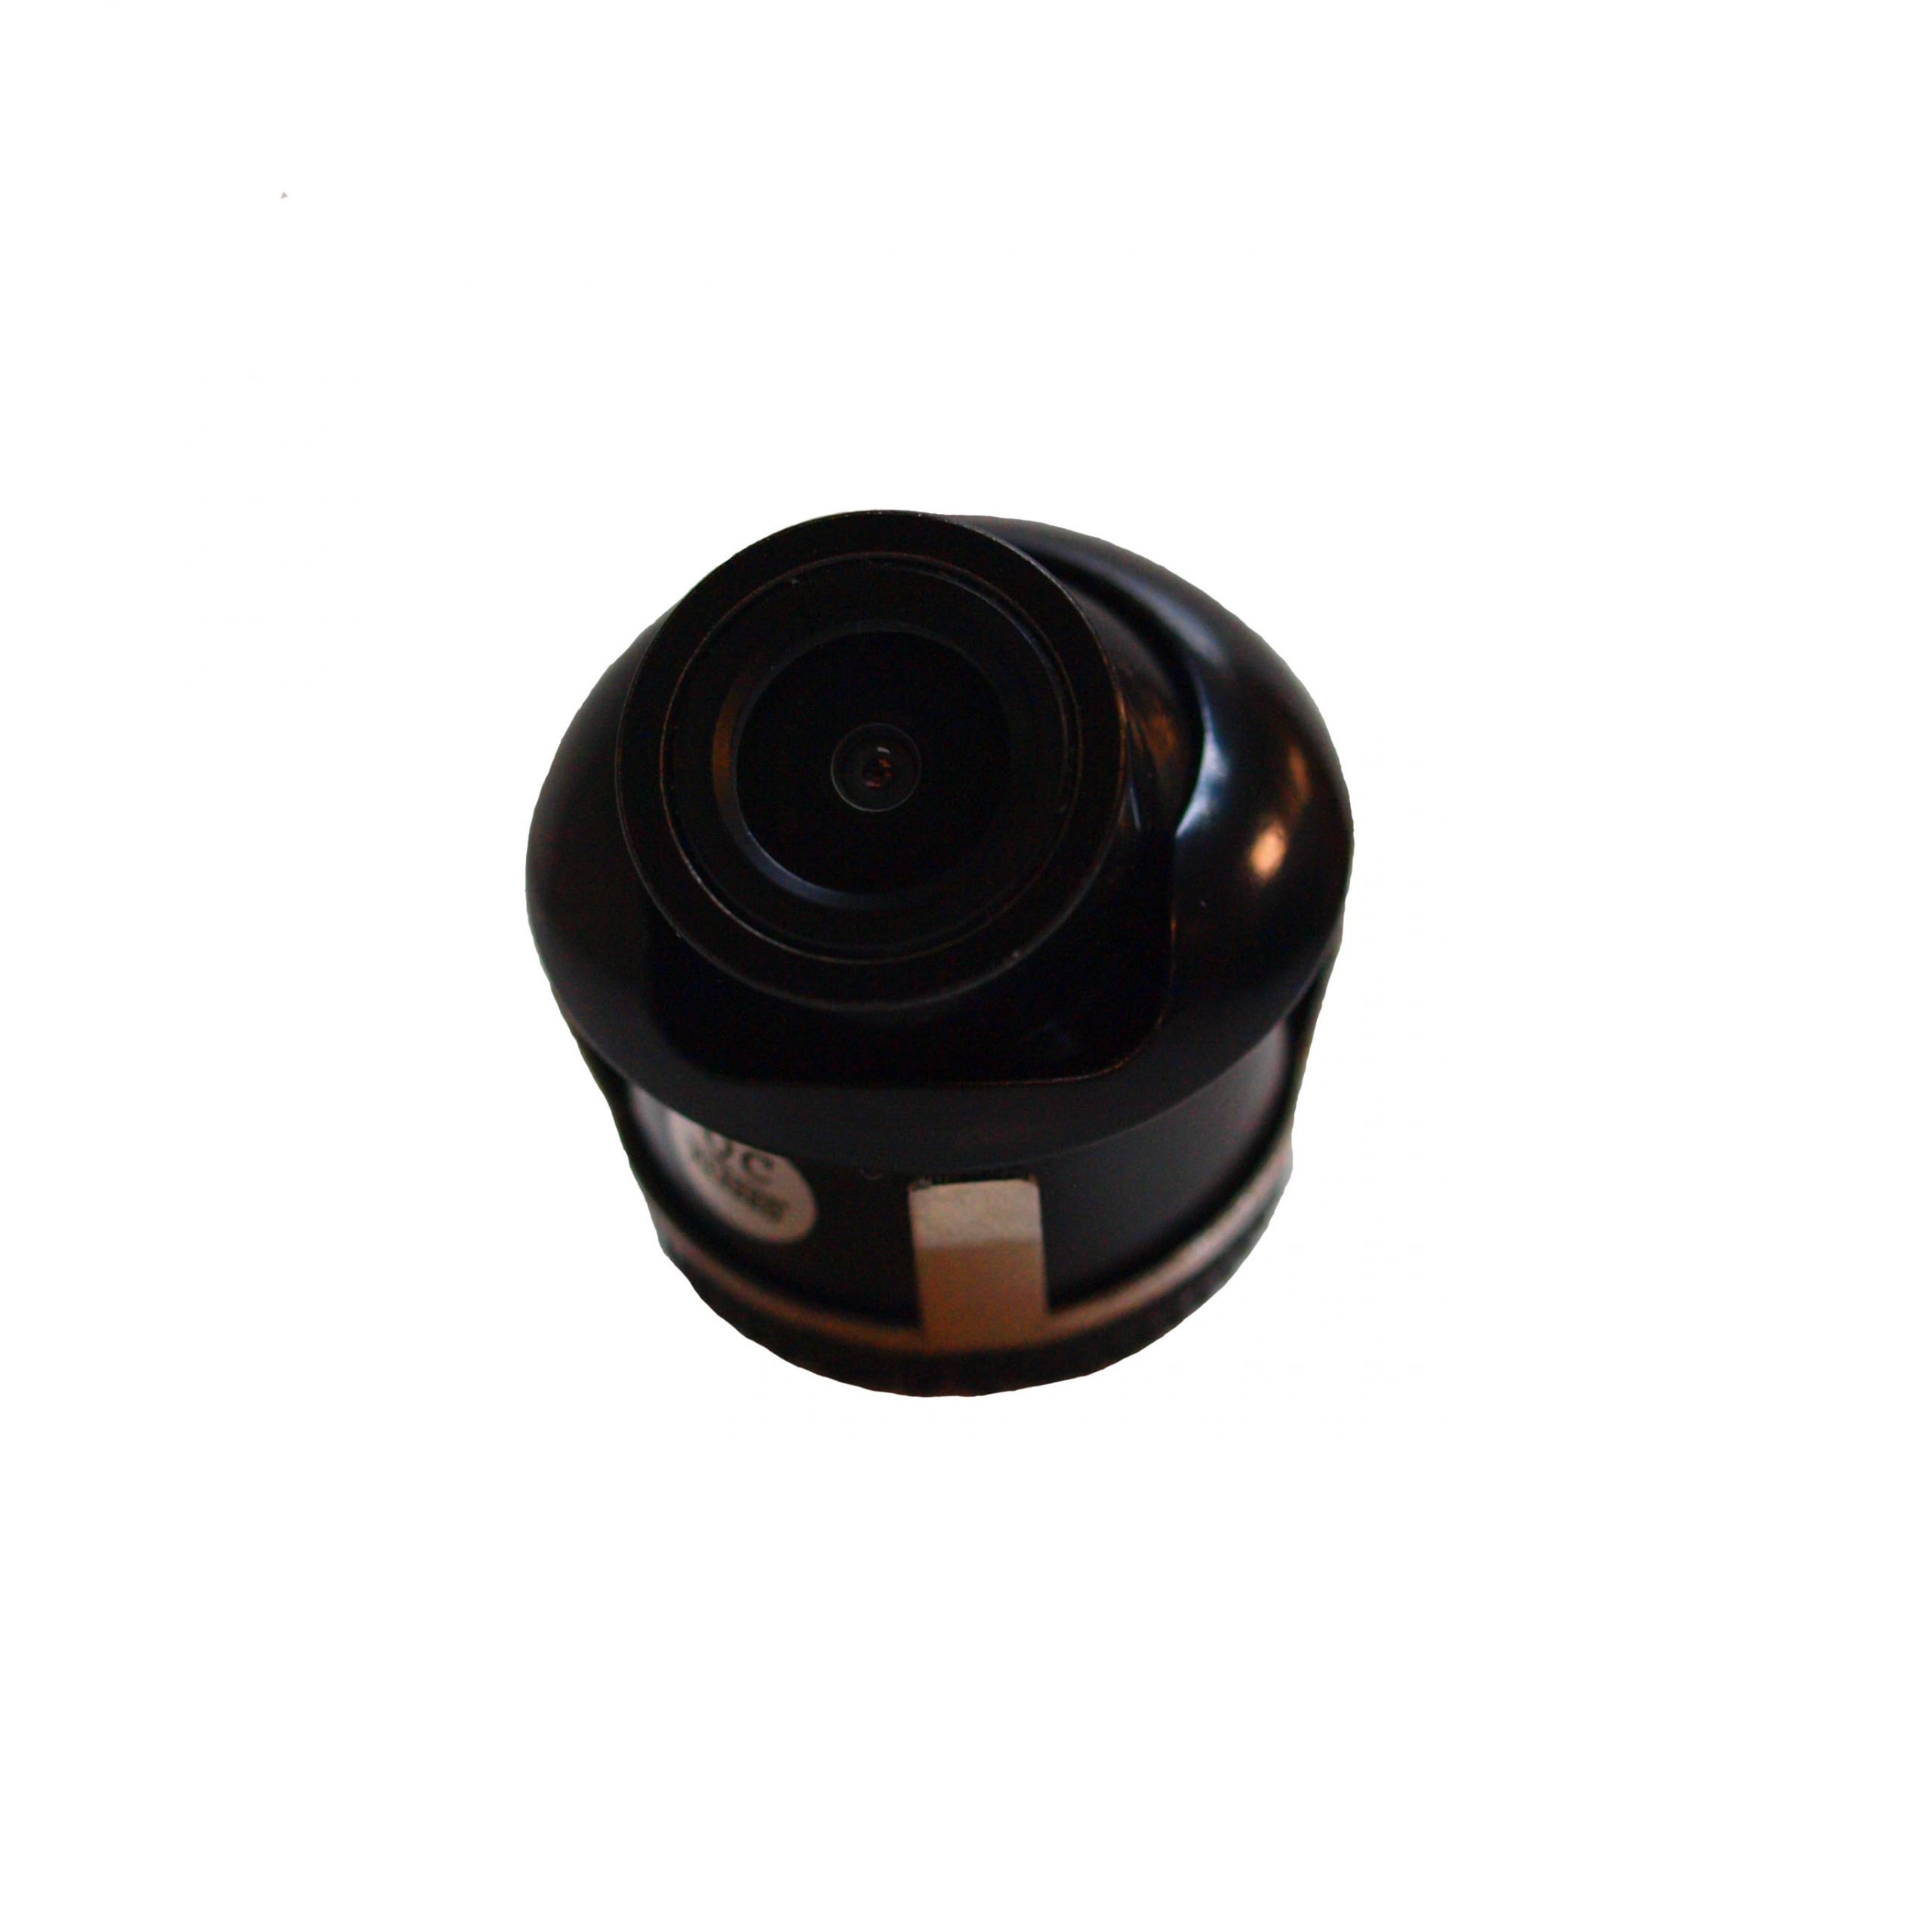 The front of a BW185 Micro Camera